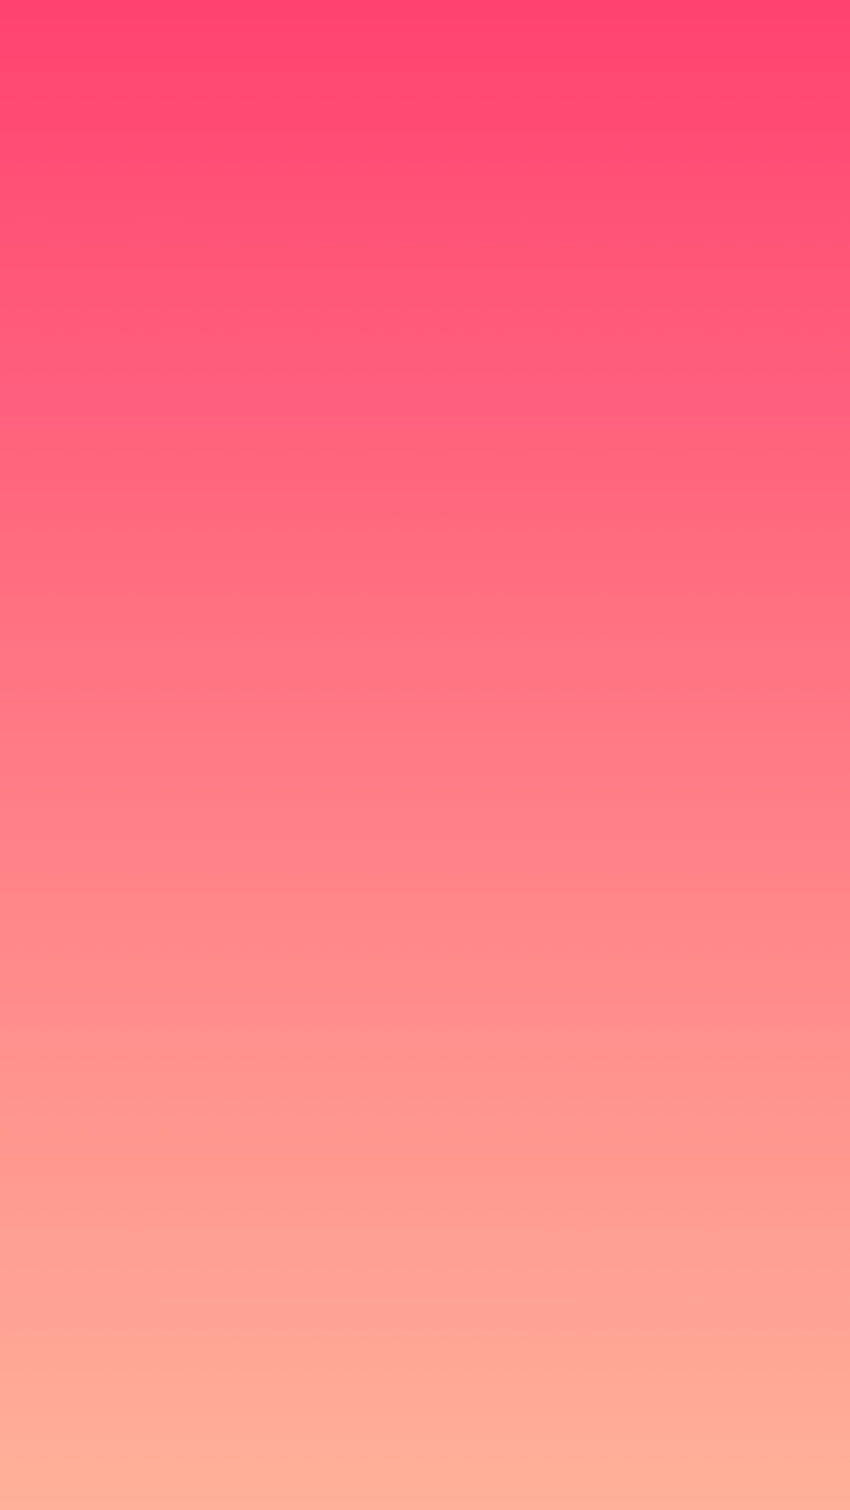 A pink and orange gradient background - Salmon